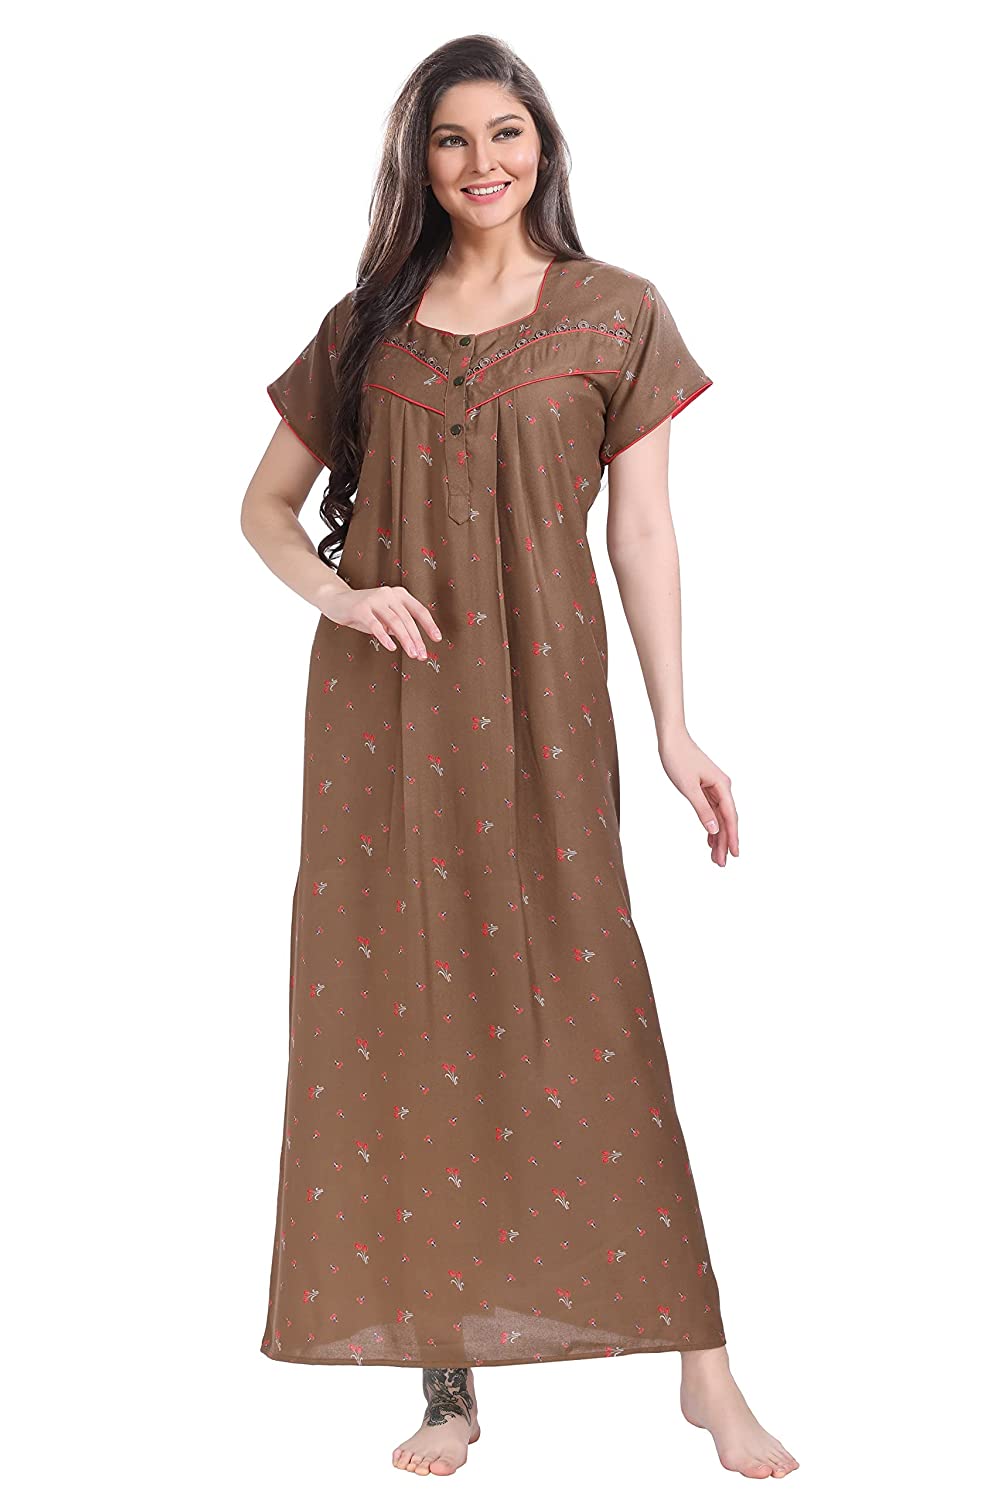 Cotton Ladies Full Sleeve Night Dress, Shirt and Short at Rs 1200/piece in  Bhopal